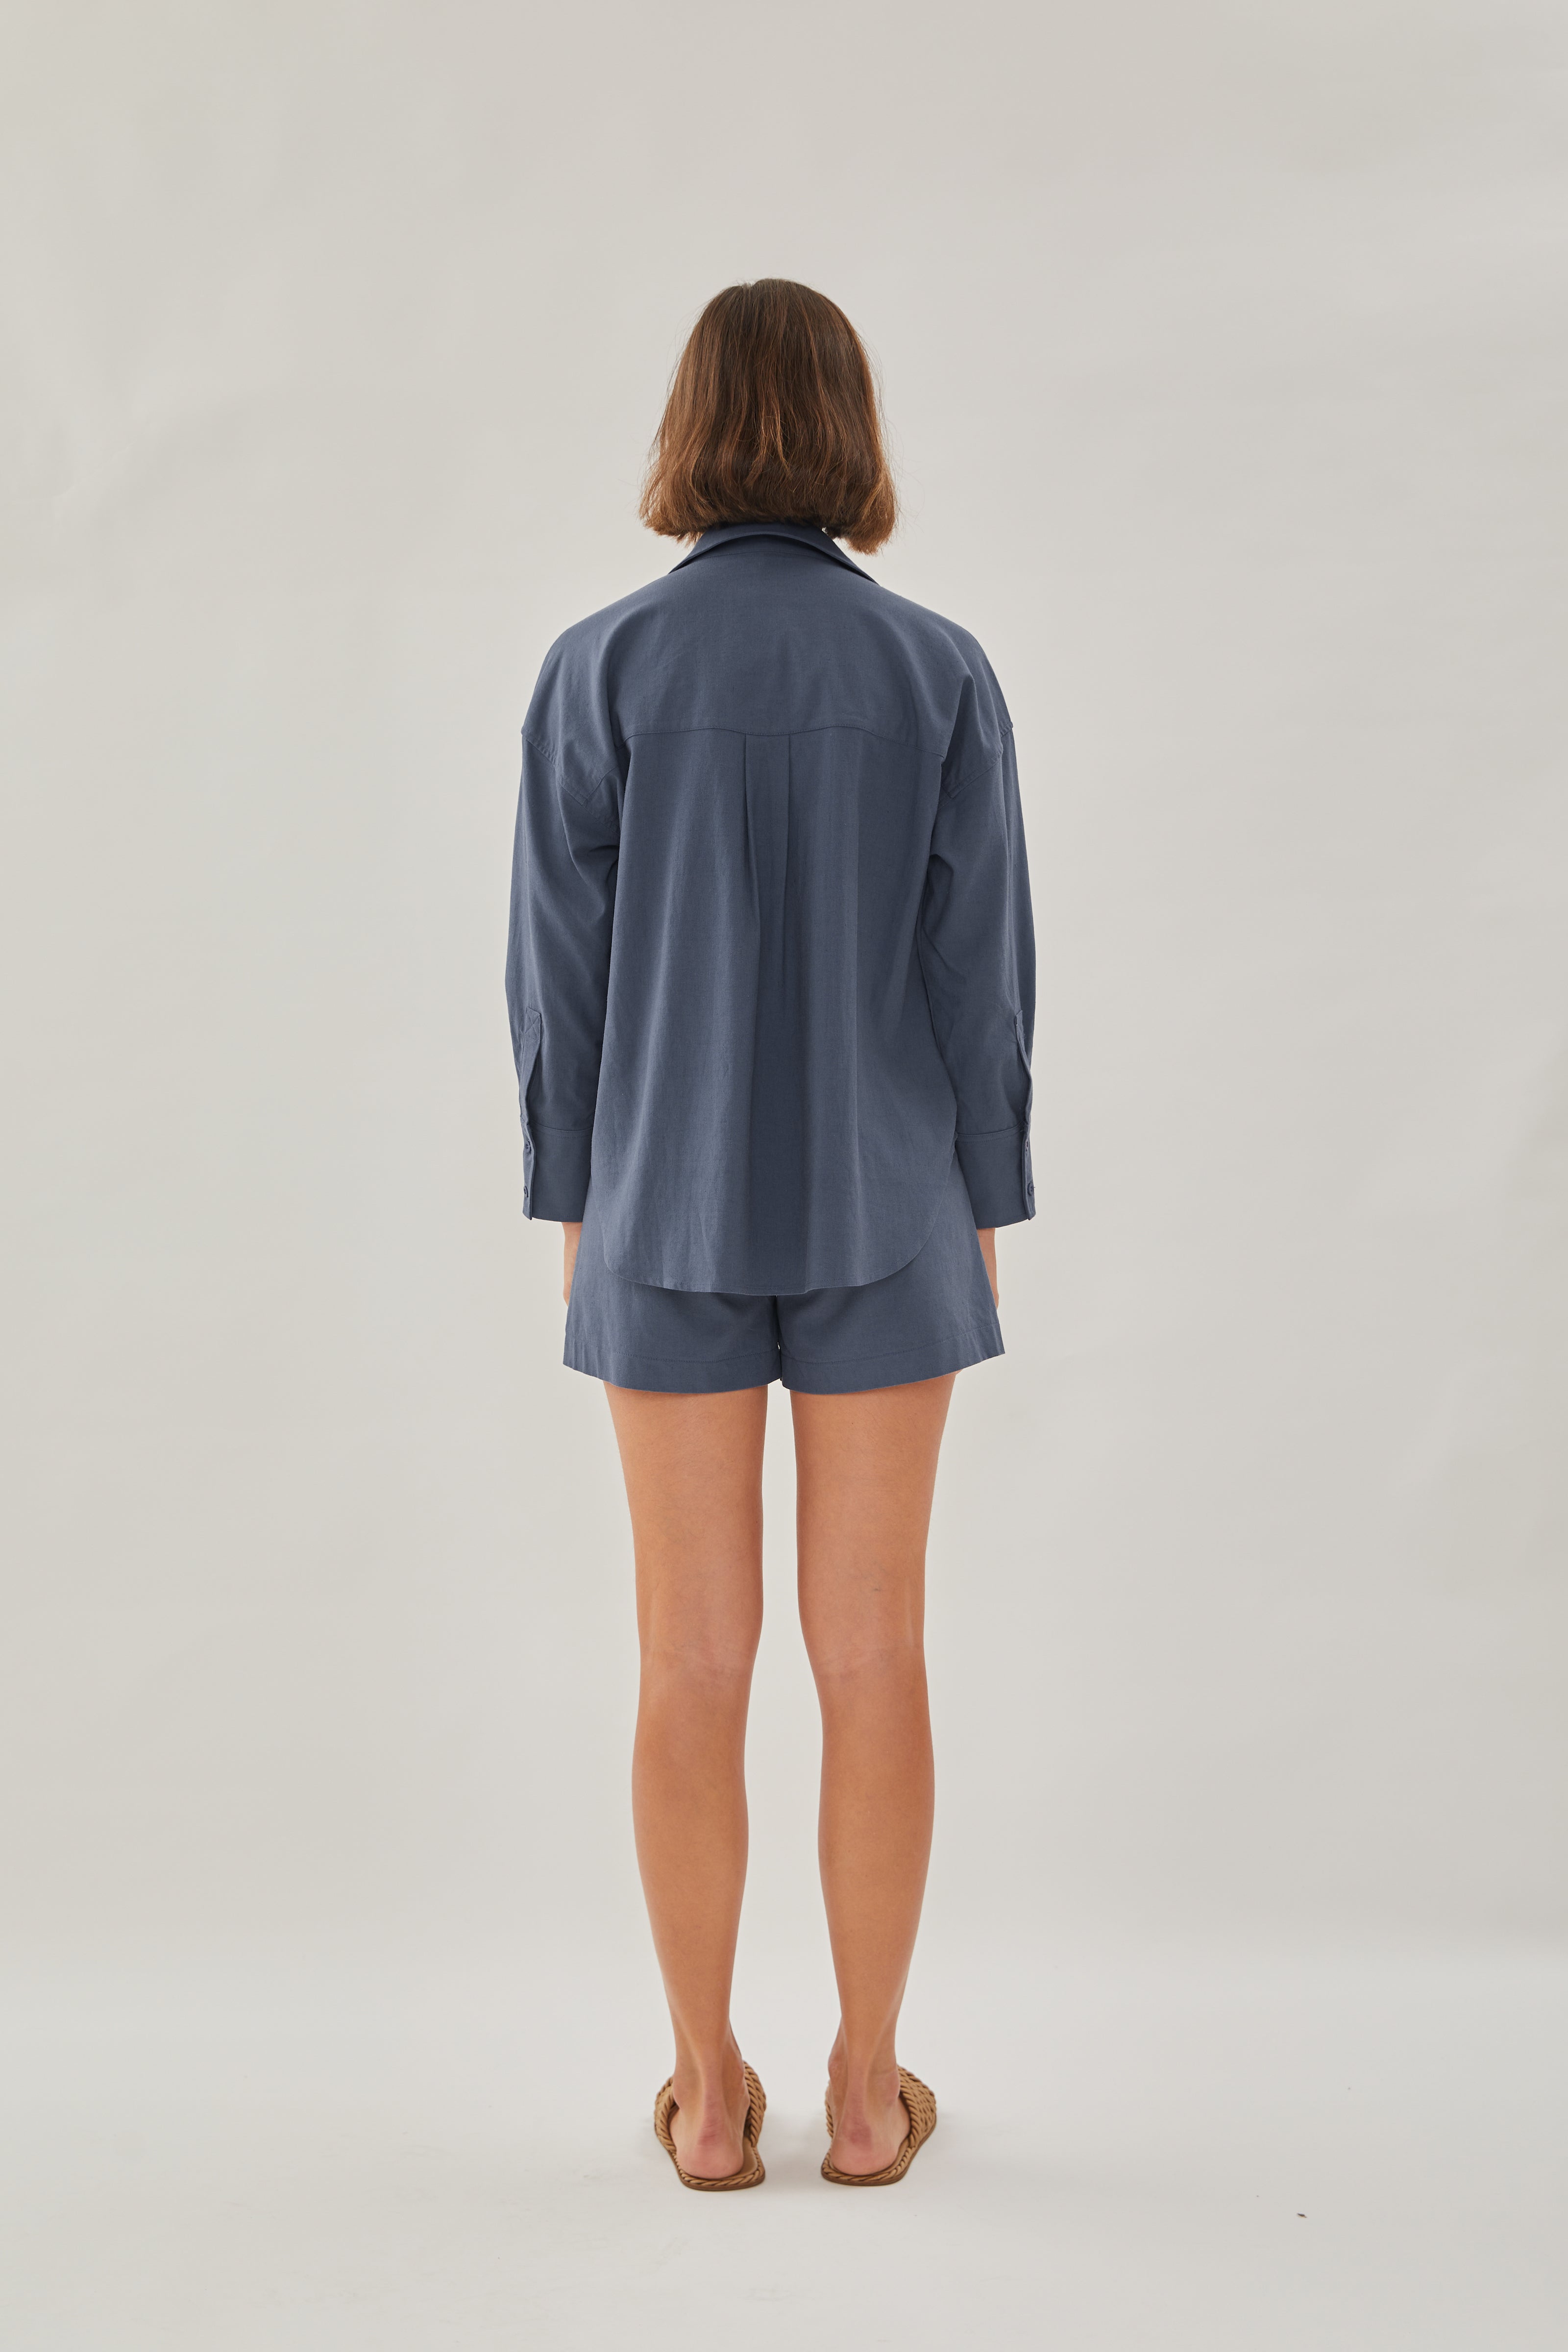 Classic Linen Shirt in Stone Blue